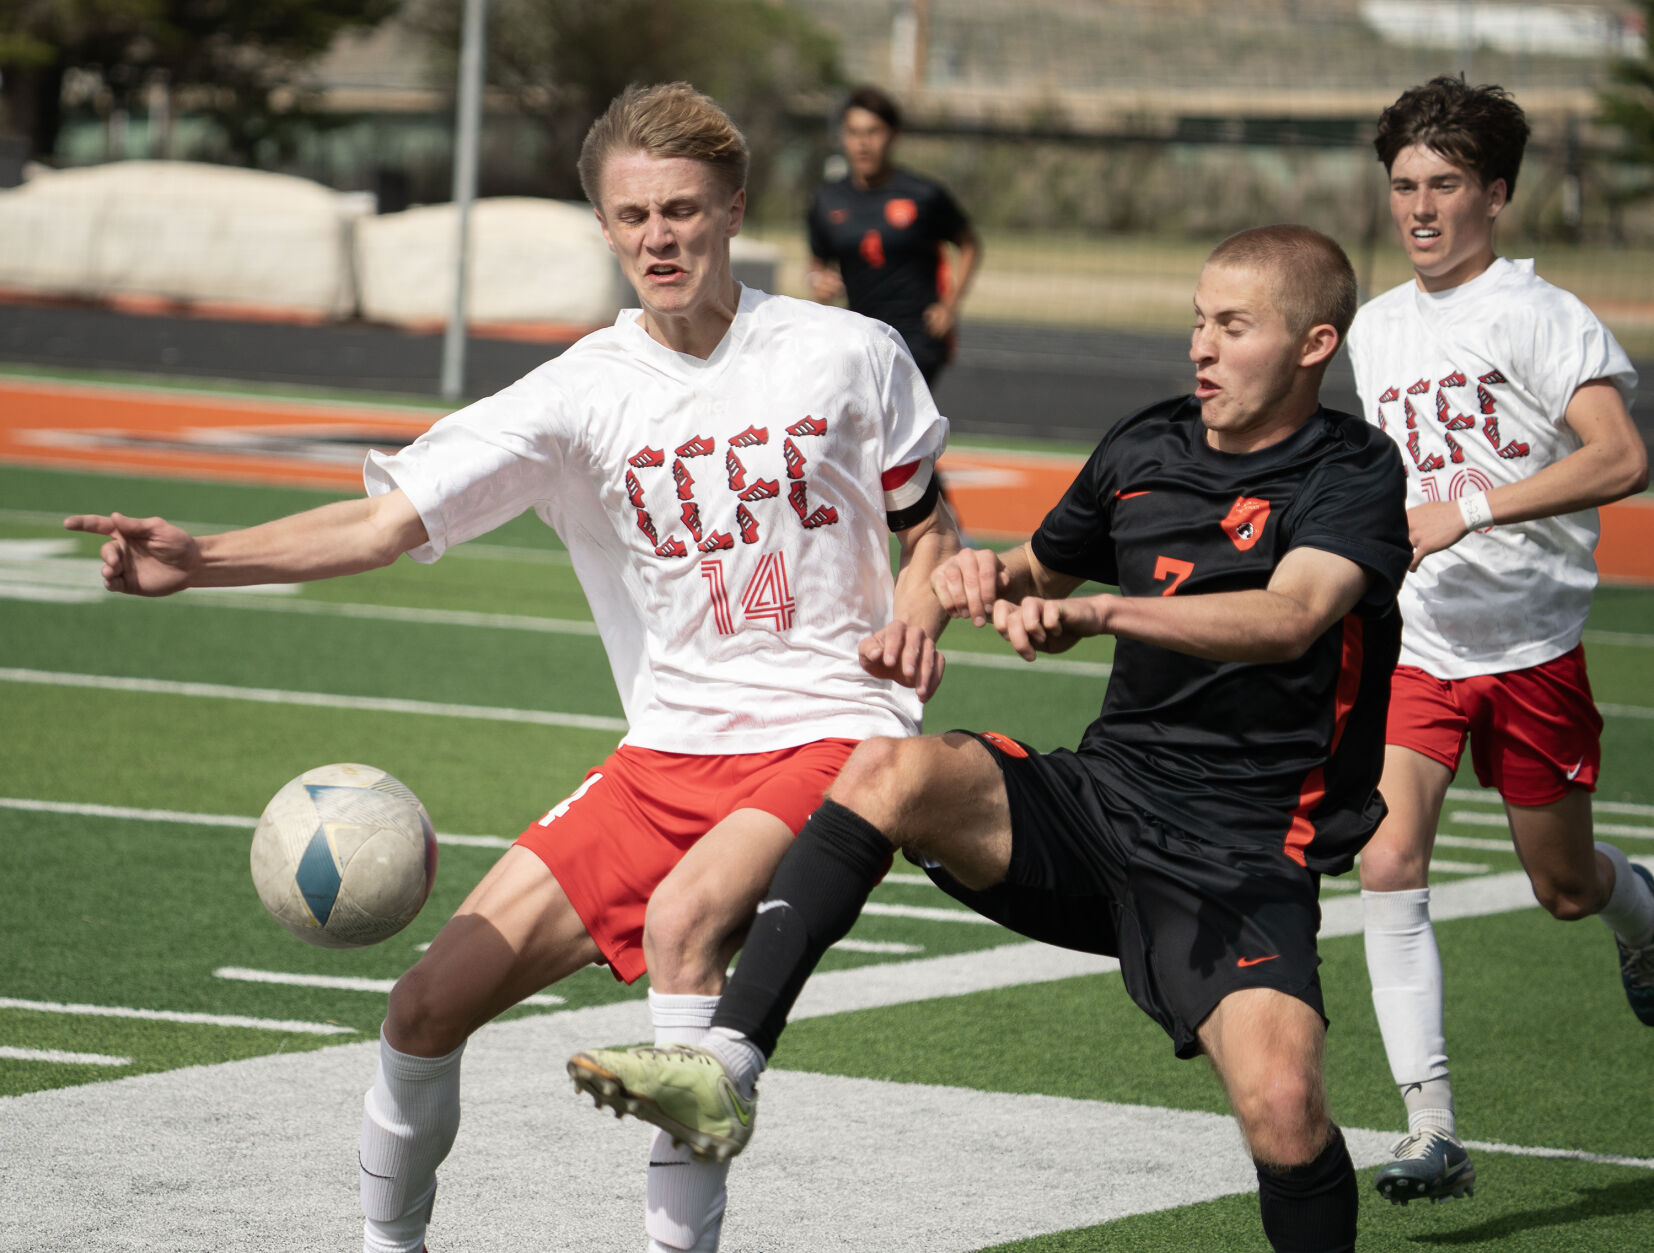 Jackson Secures Class 4A Soccer Title in Dominant 4-0 Victory over Cheyenne Central